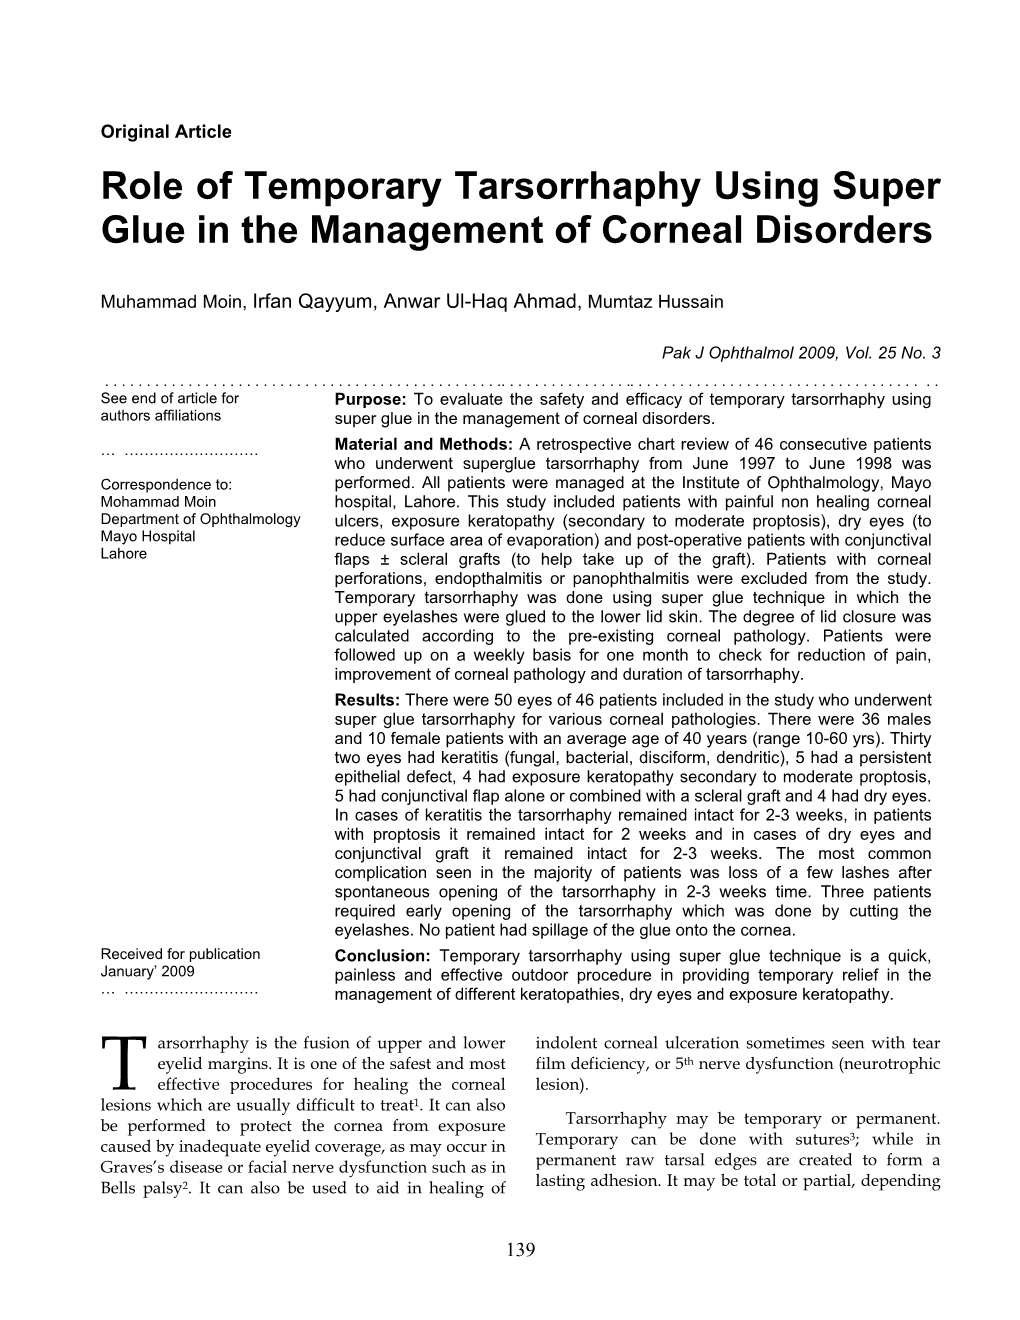 Role of Temporary Tarsorrhaphy Using Super Glue in the Management of Corneal Disorders